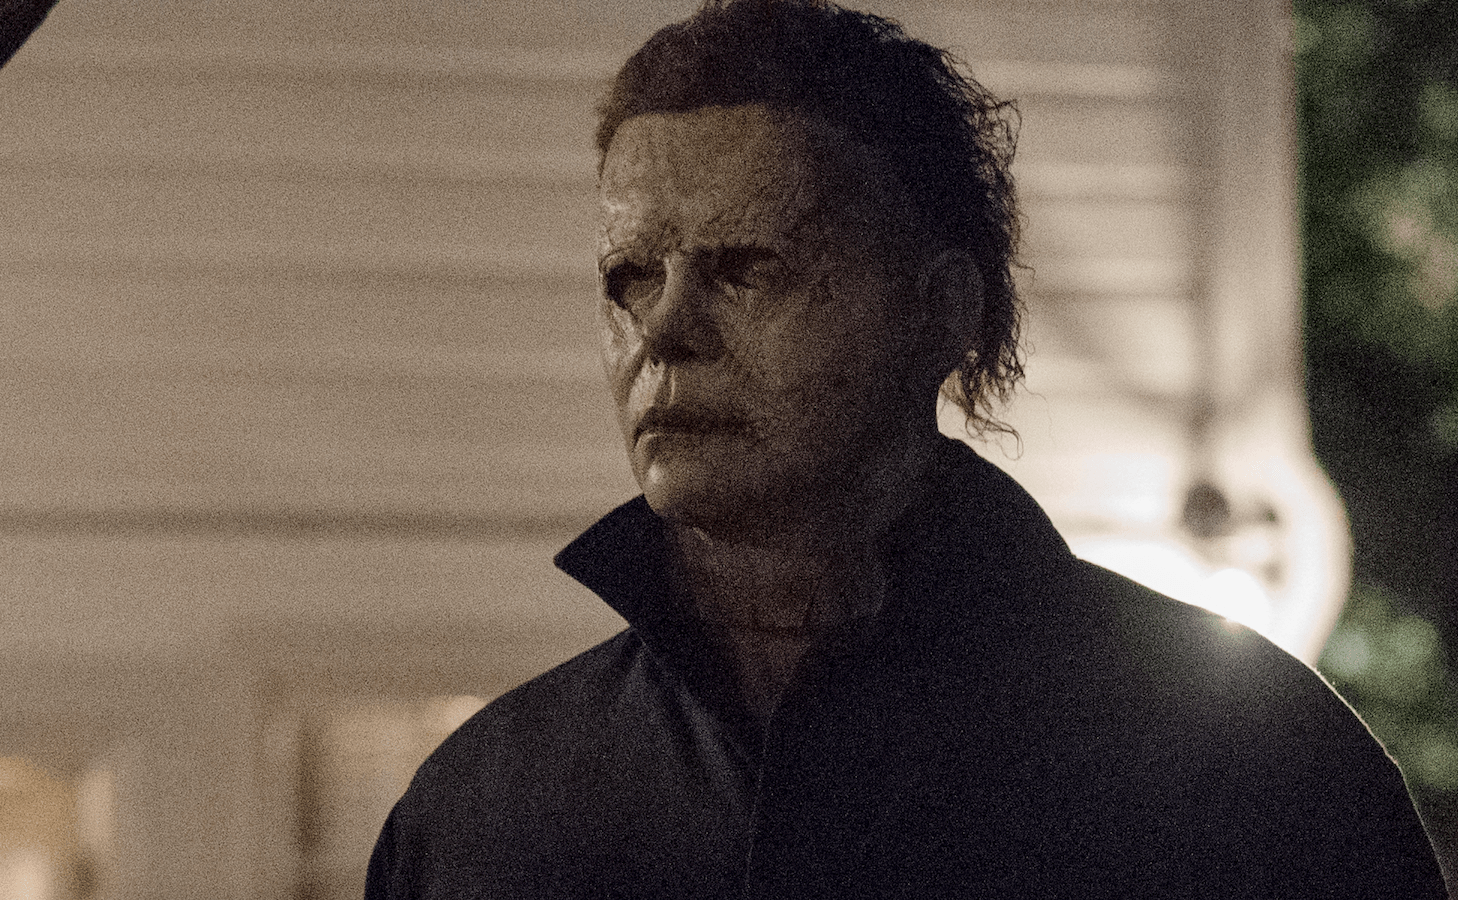 Gallery These Mega Sized HD Image Of Michael Myers From The New